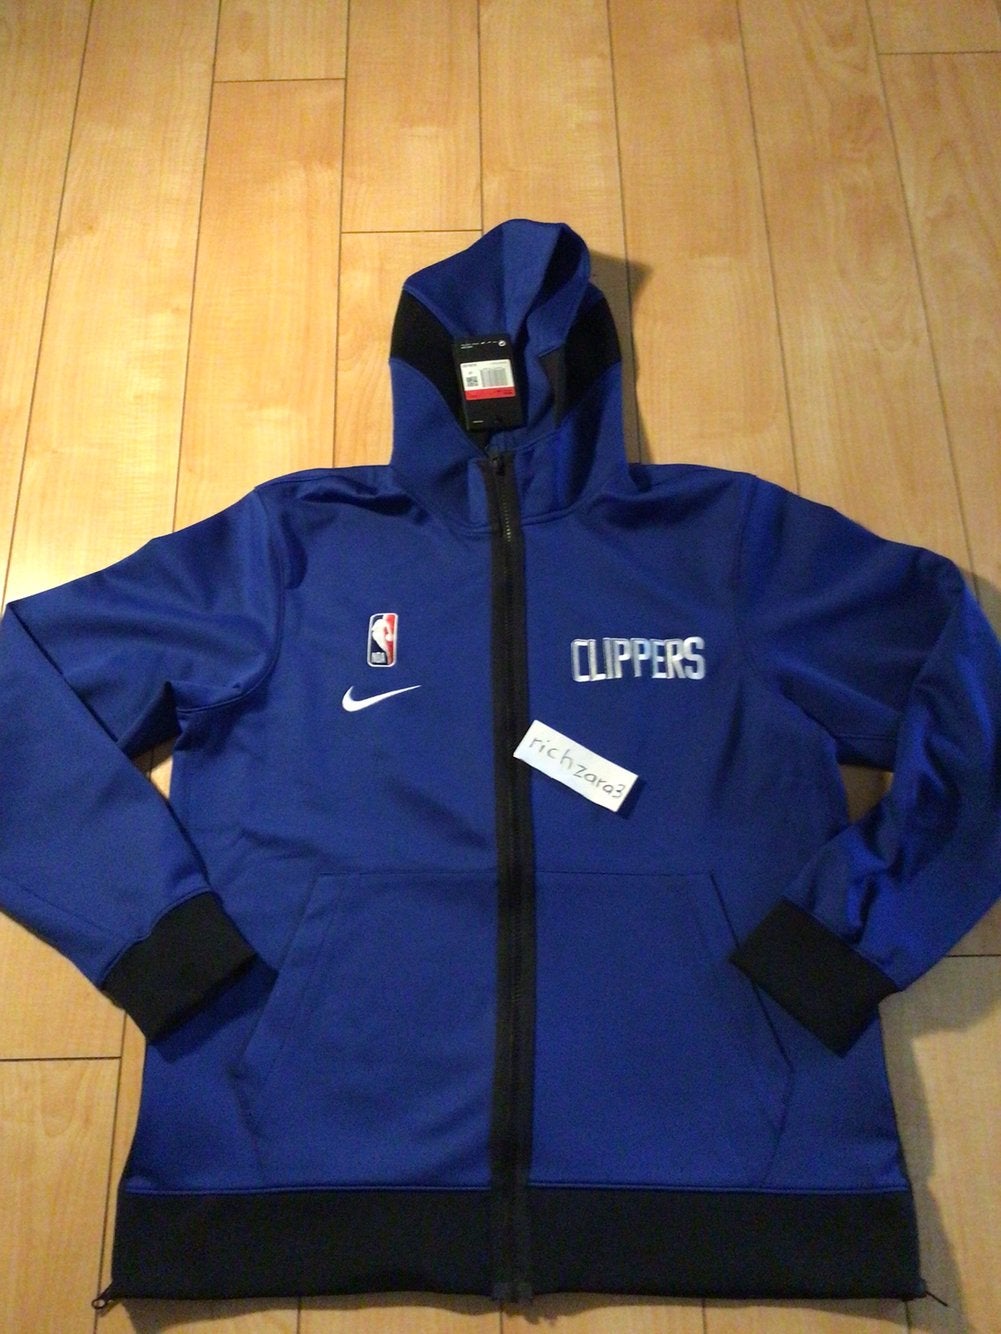 Nike Therma Flex Showtime NBA Los Angeles Clippers Player Edition Jacket Blue (Men's) 899847-495 US M